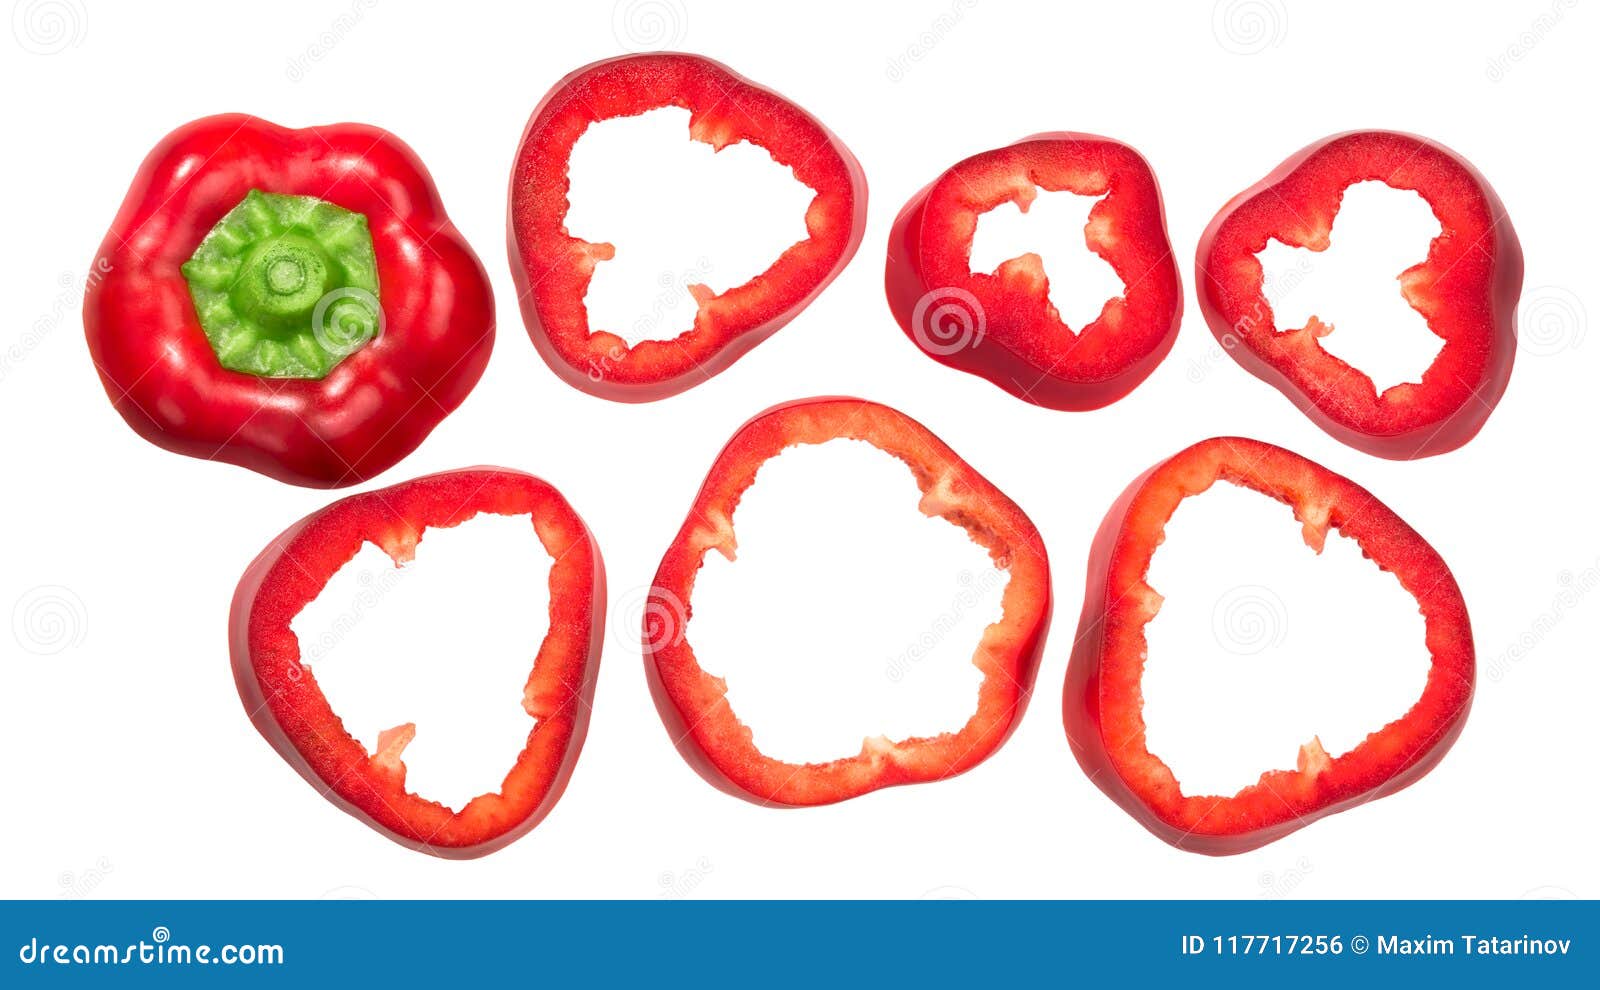 sweet bell pepper slices, top view